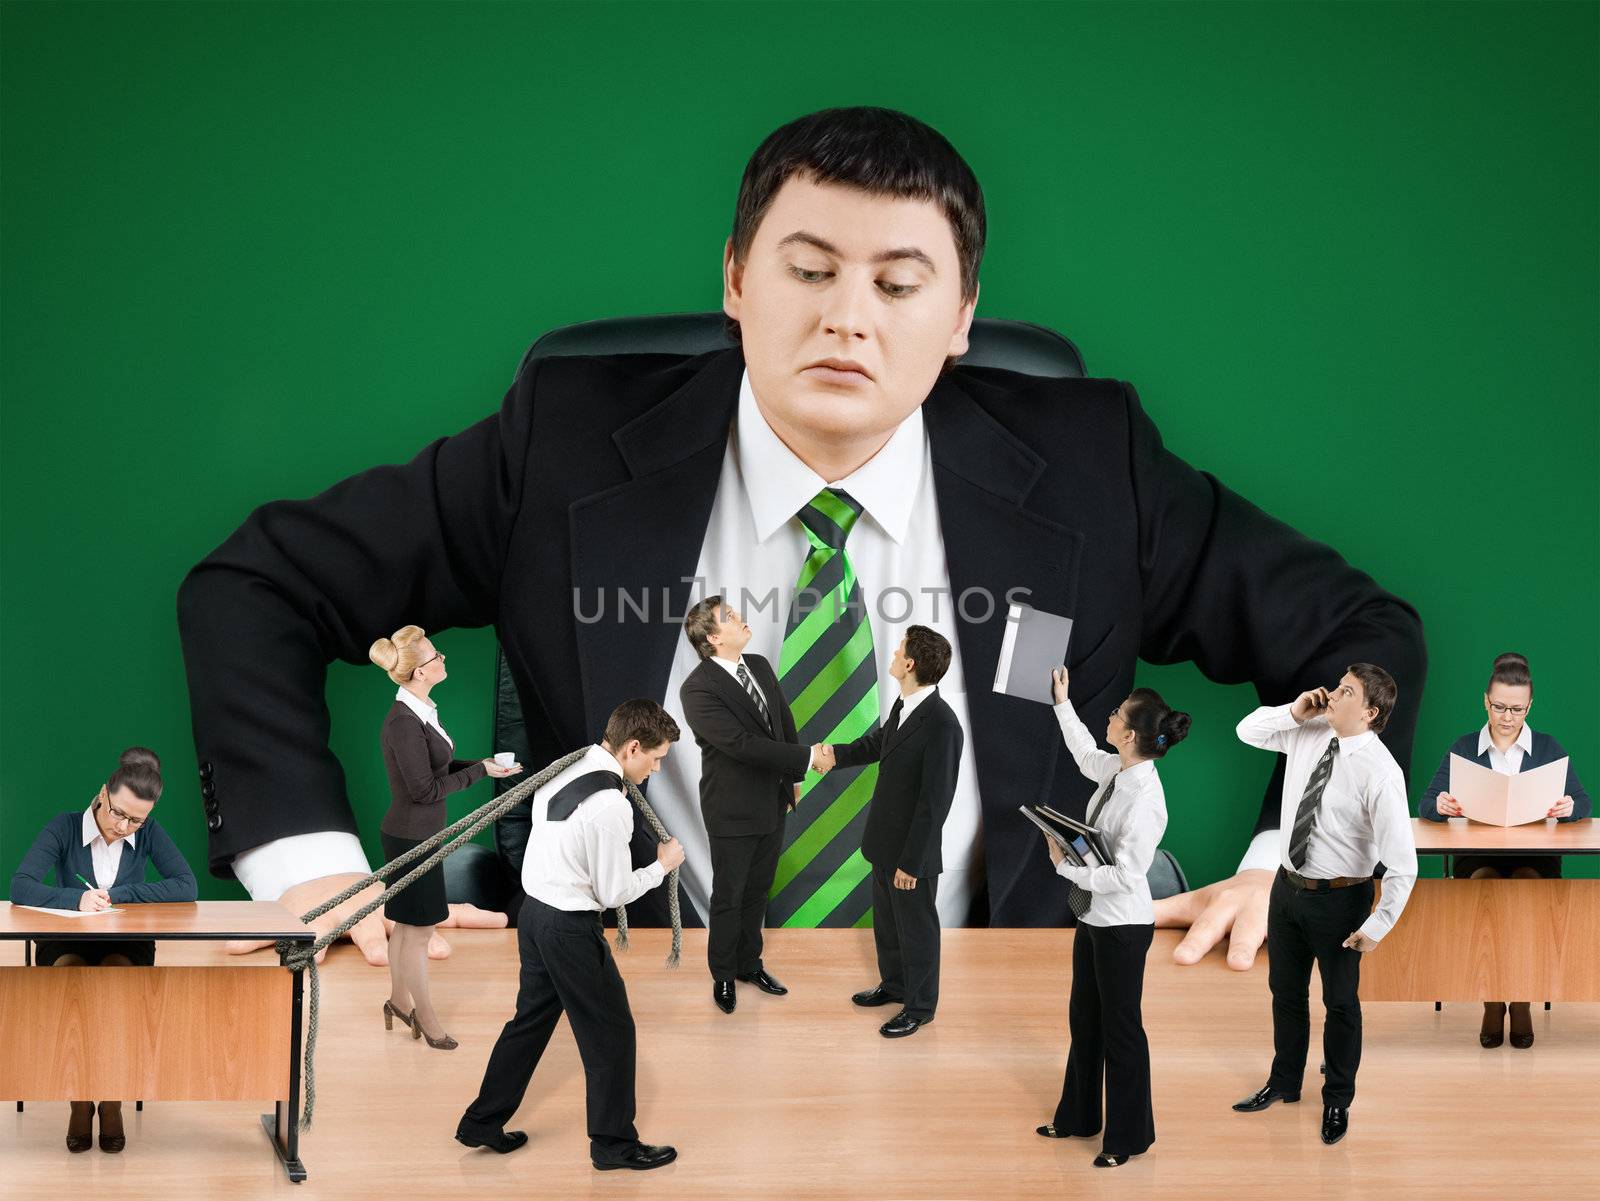 Boss and business team on green background by zeffss